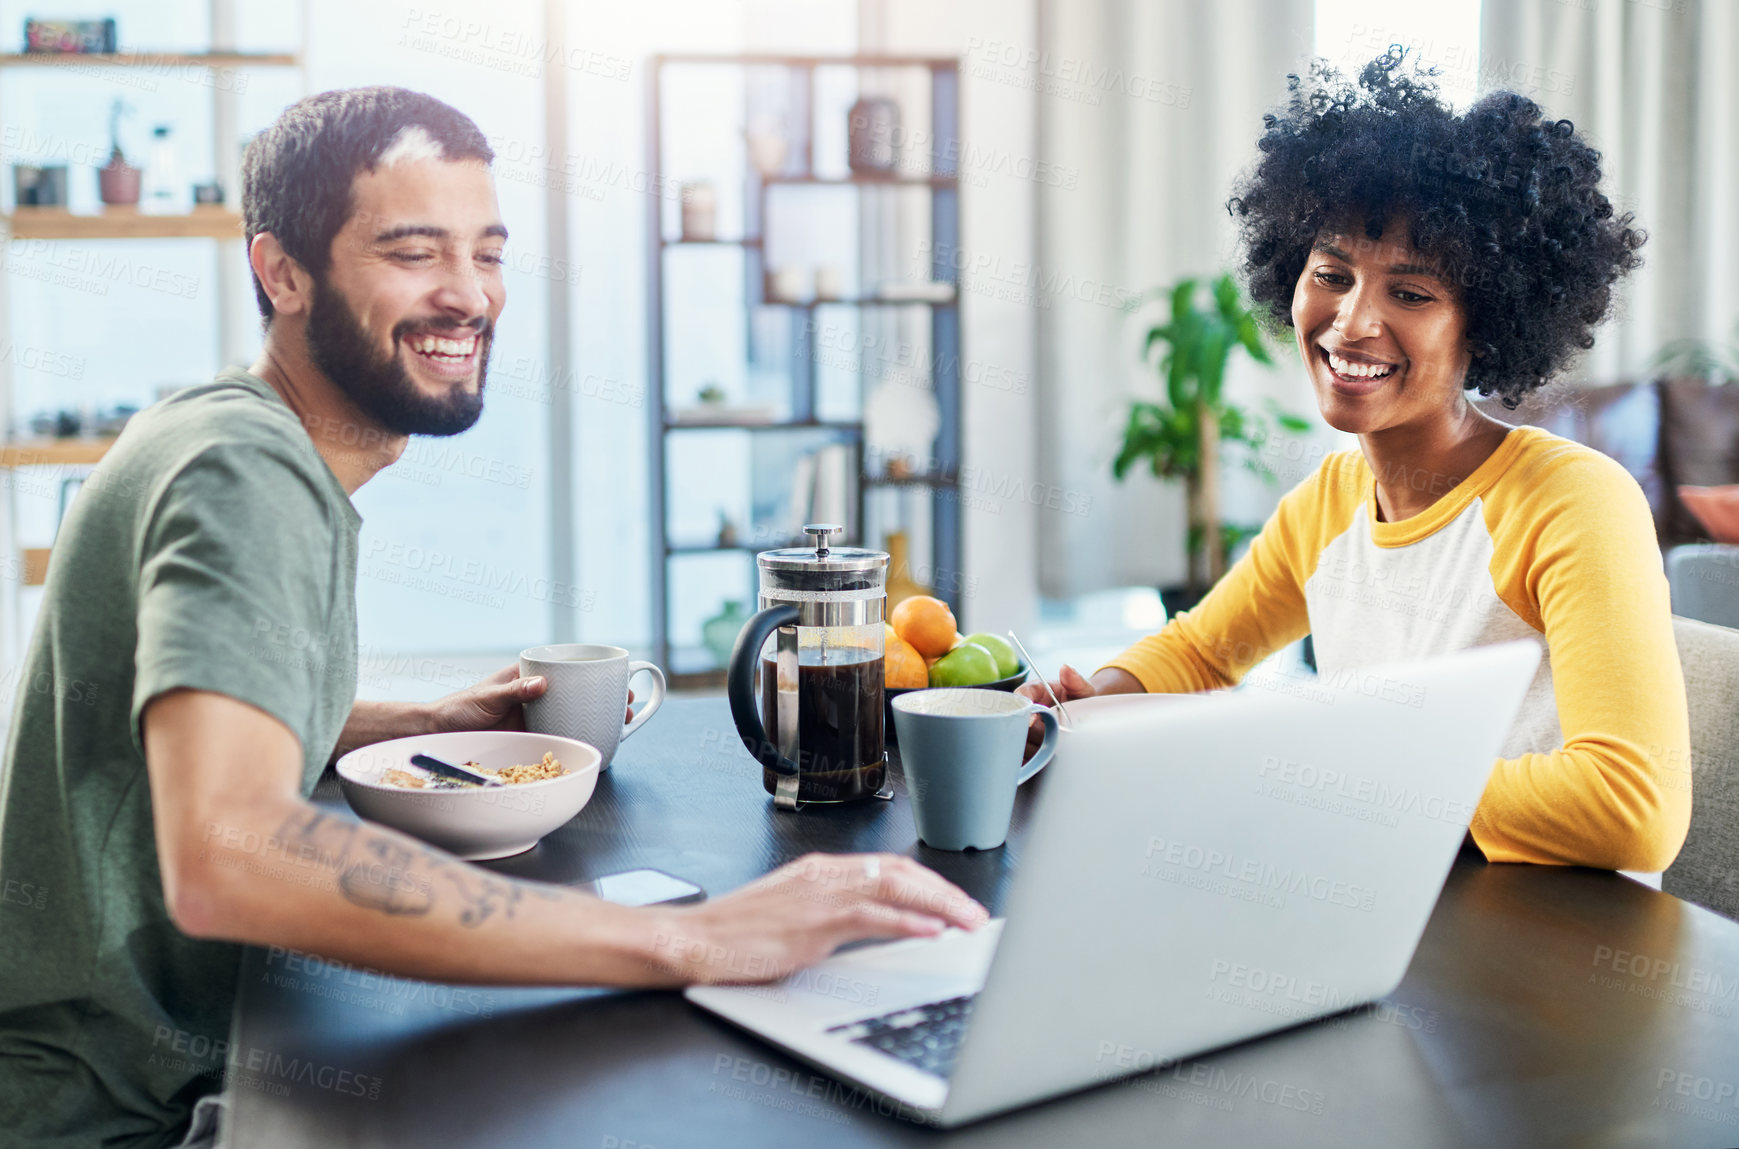 Buy stock photo Shot of a young couple using a laptop while having breakfast at home